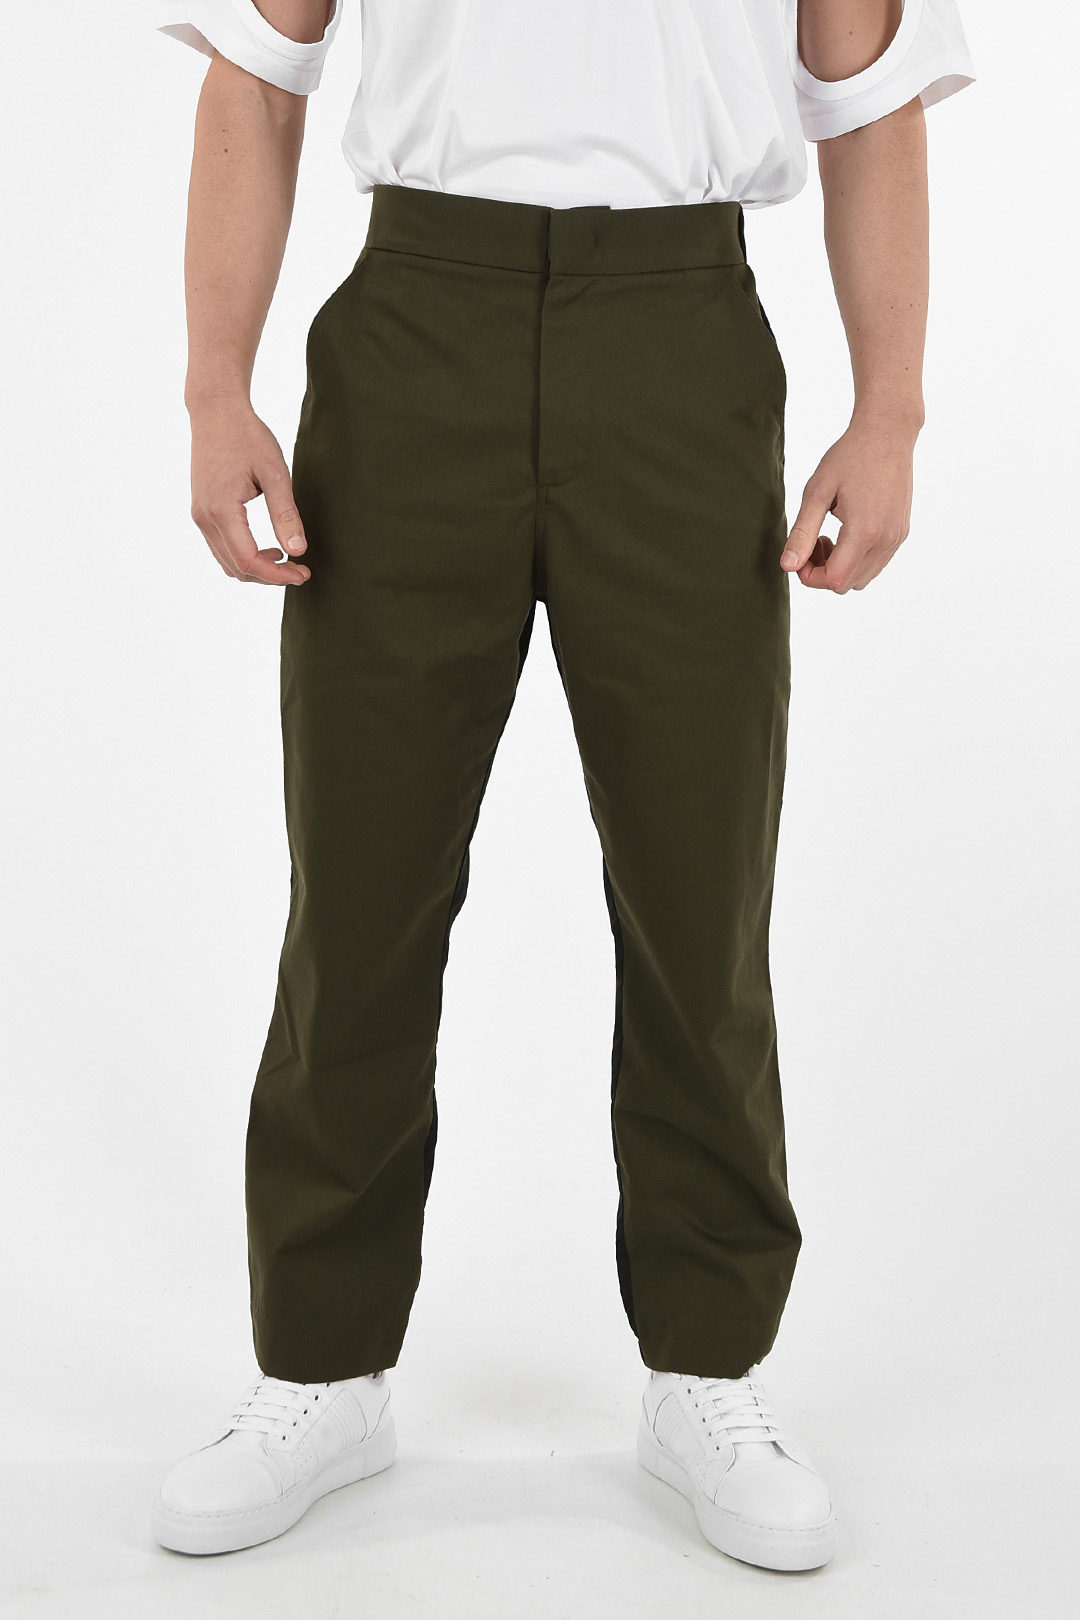 Moncler Waterproof Joggers With Elastic Waist Band men - Glamood Outlet